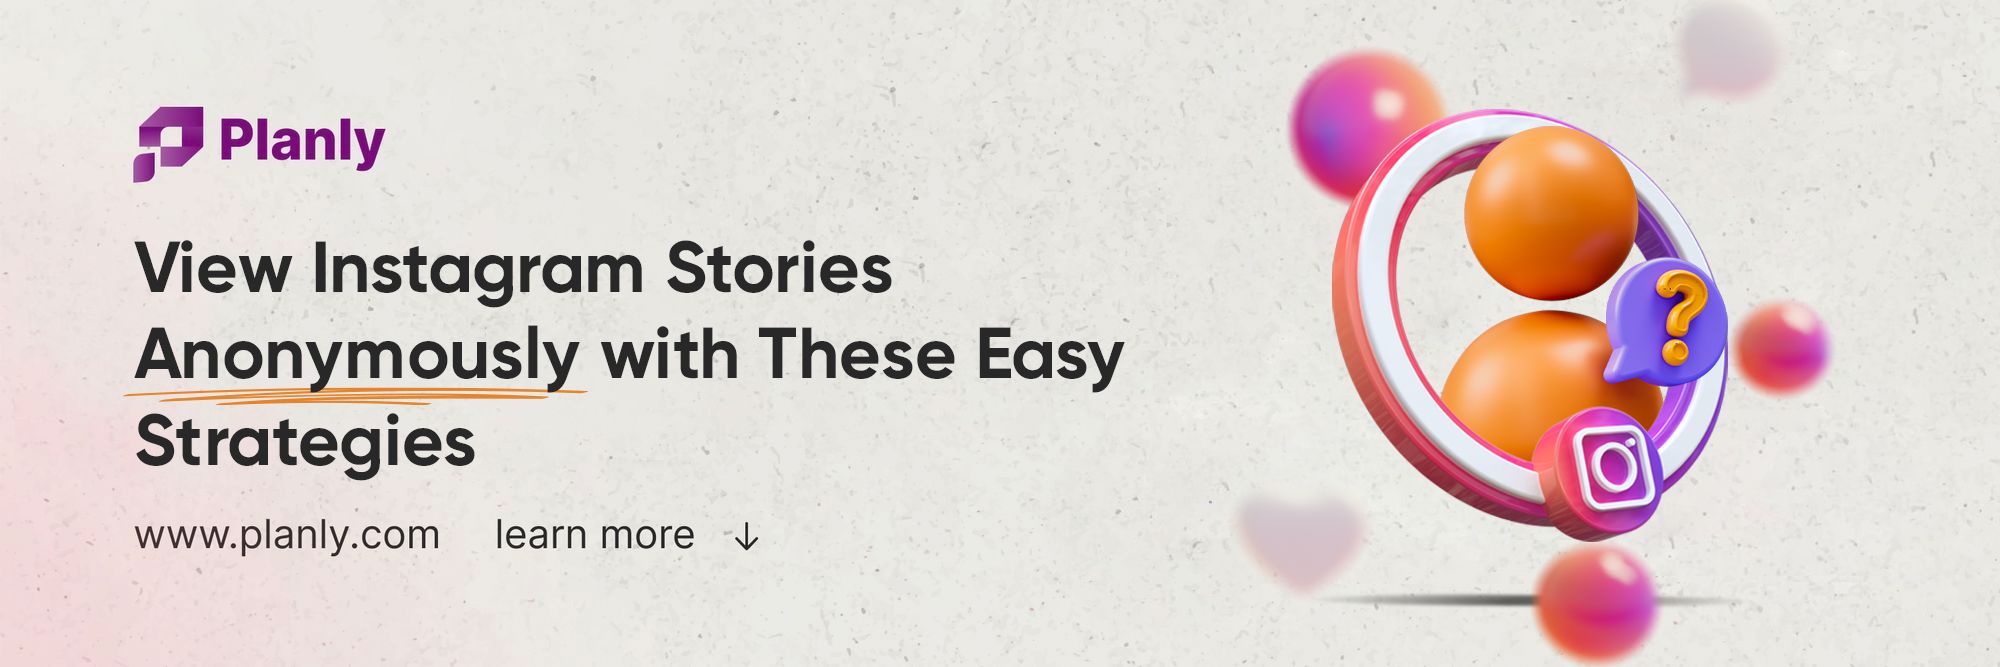 View Instagram Stories Anonymously with Easy Strategies